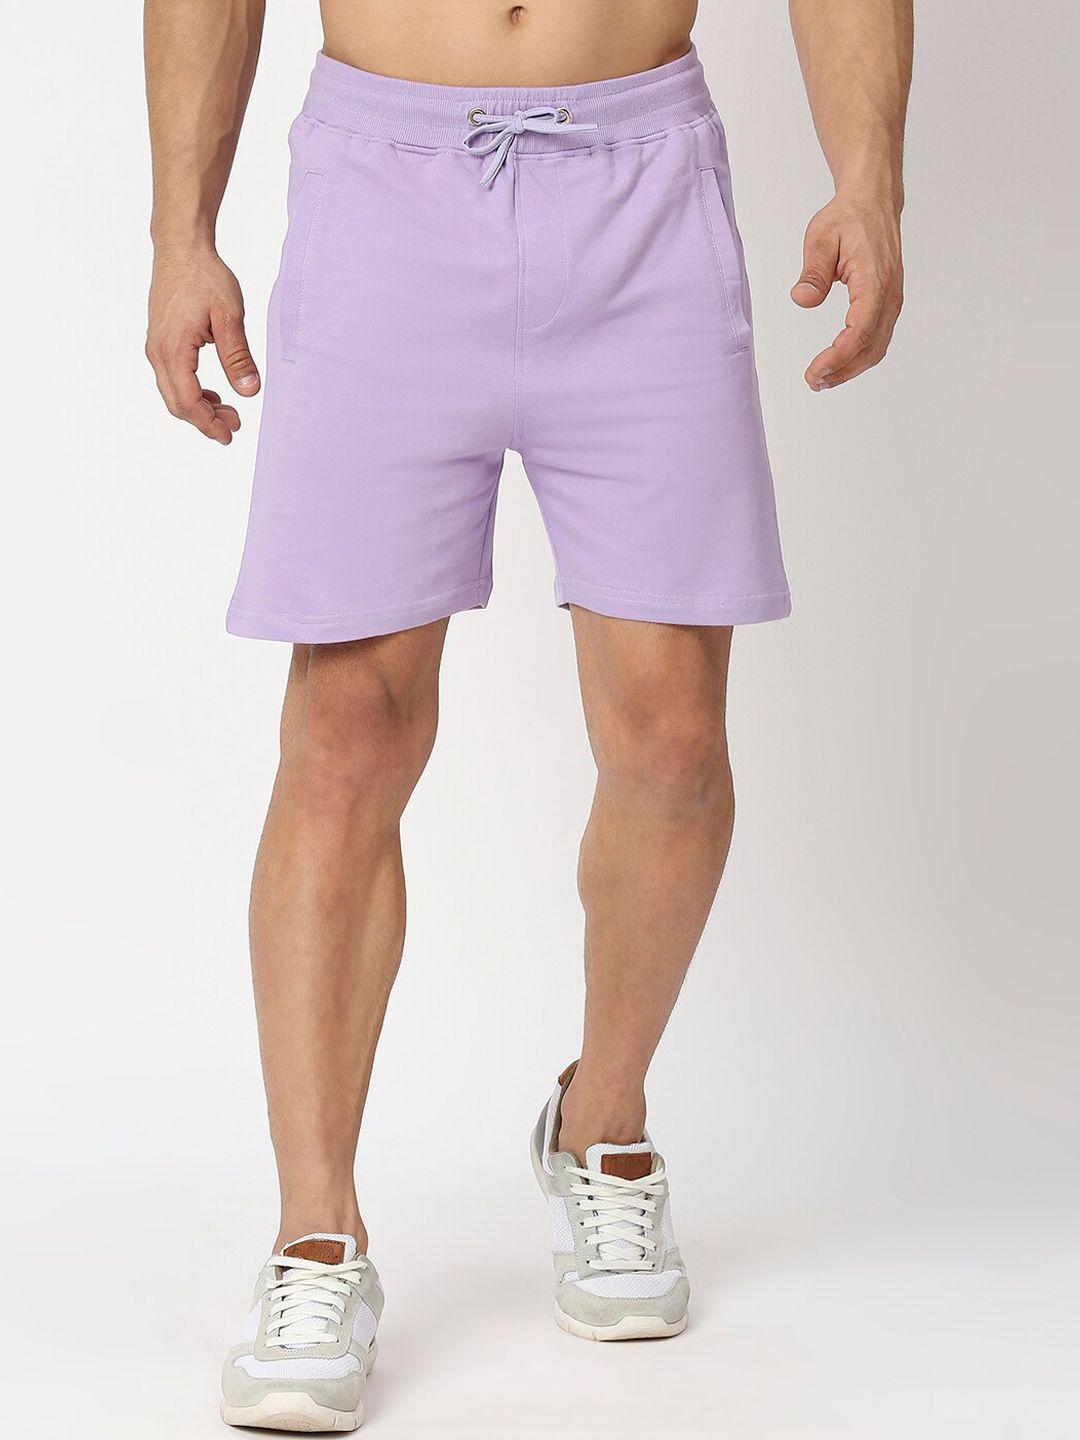 the daily outfits men mid-rise regular cotton shorts